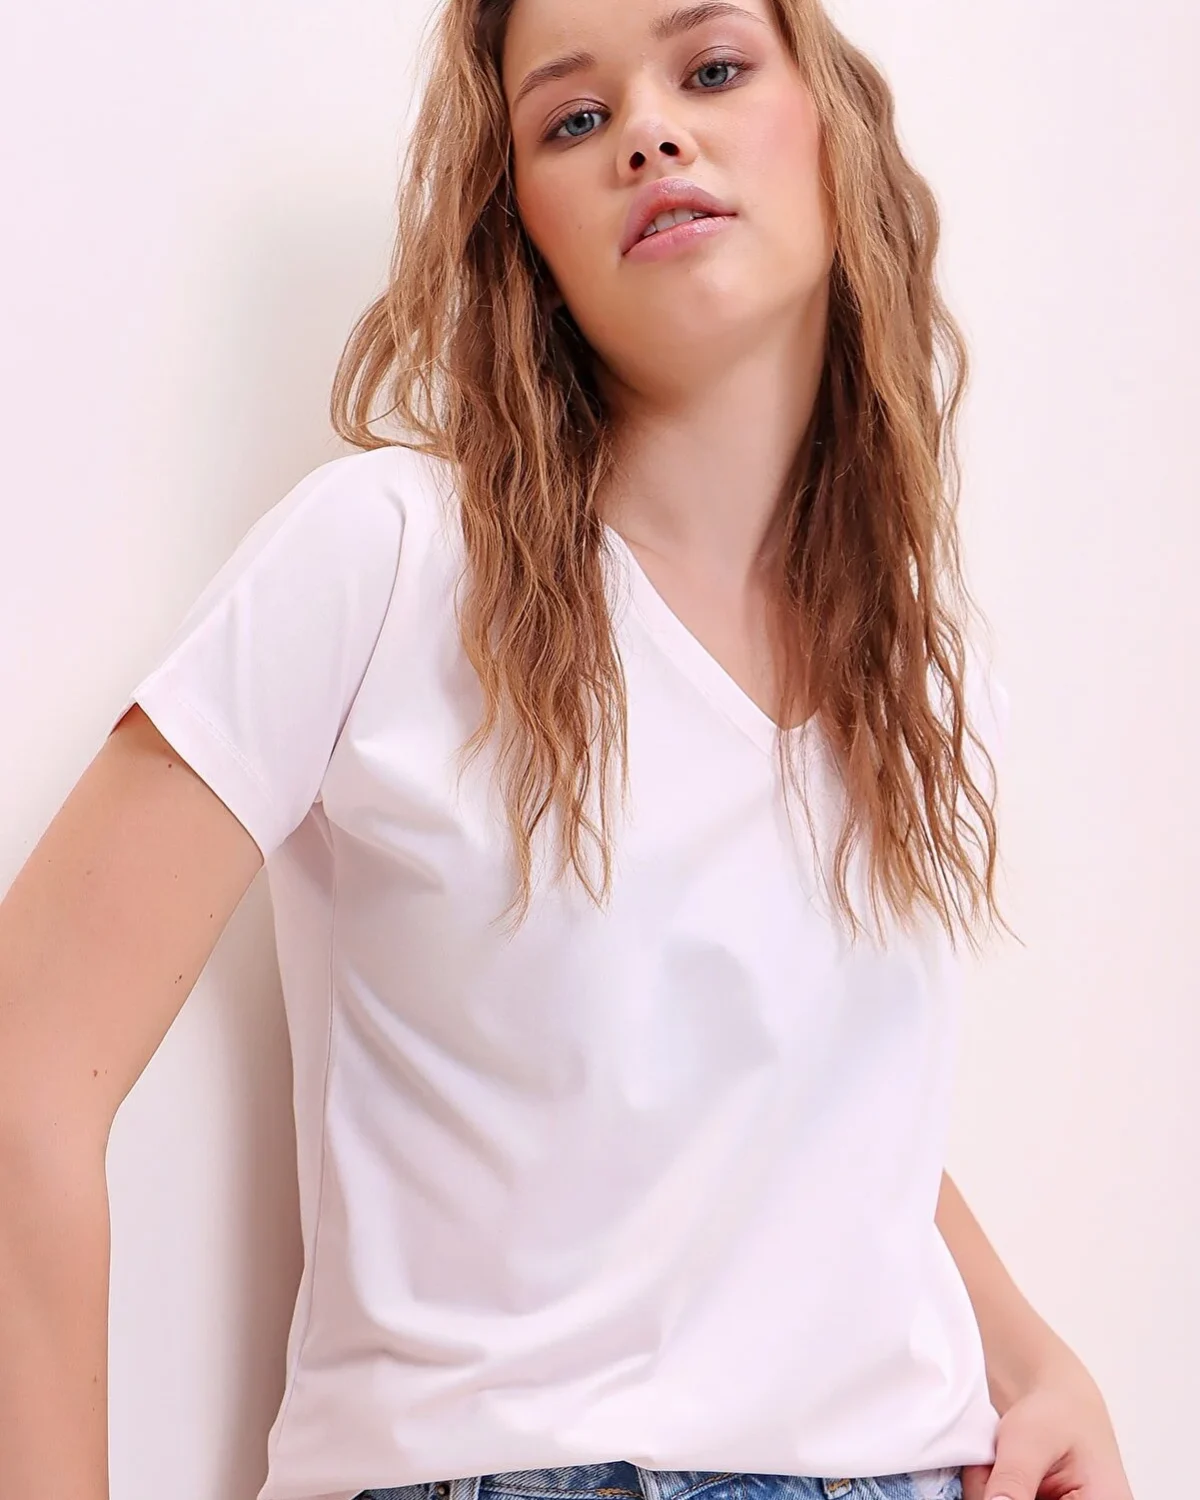 Xlacati Collection White T-shirt for Women by Picks for Less